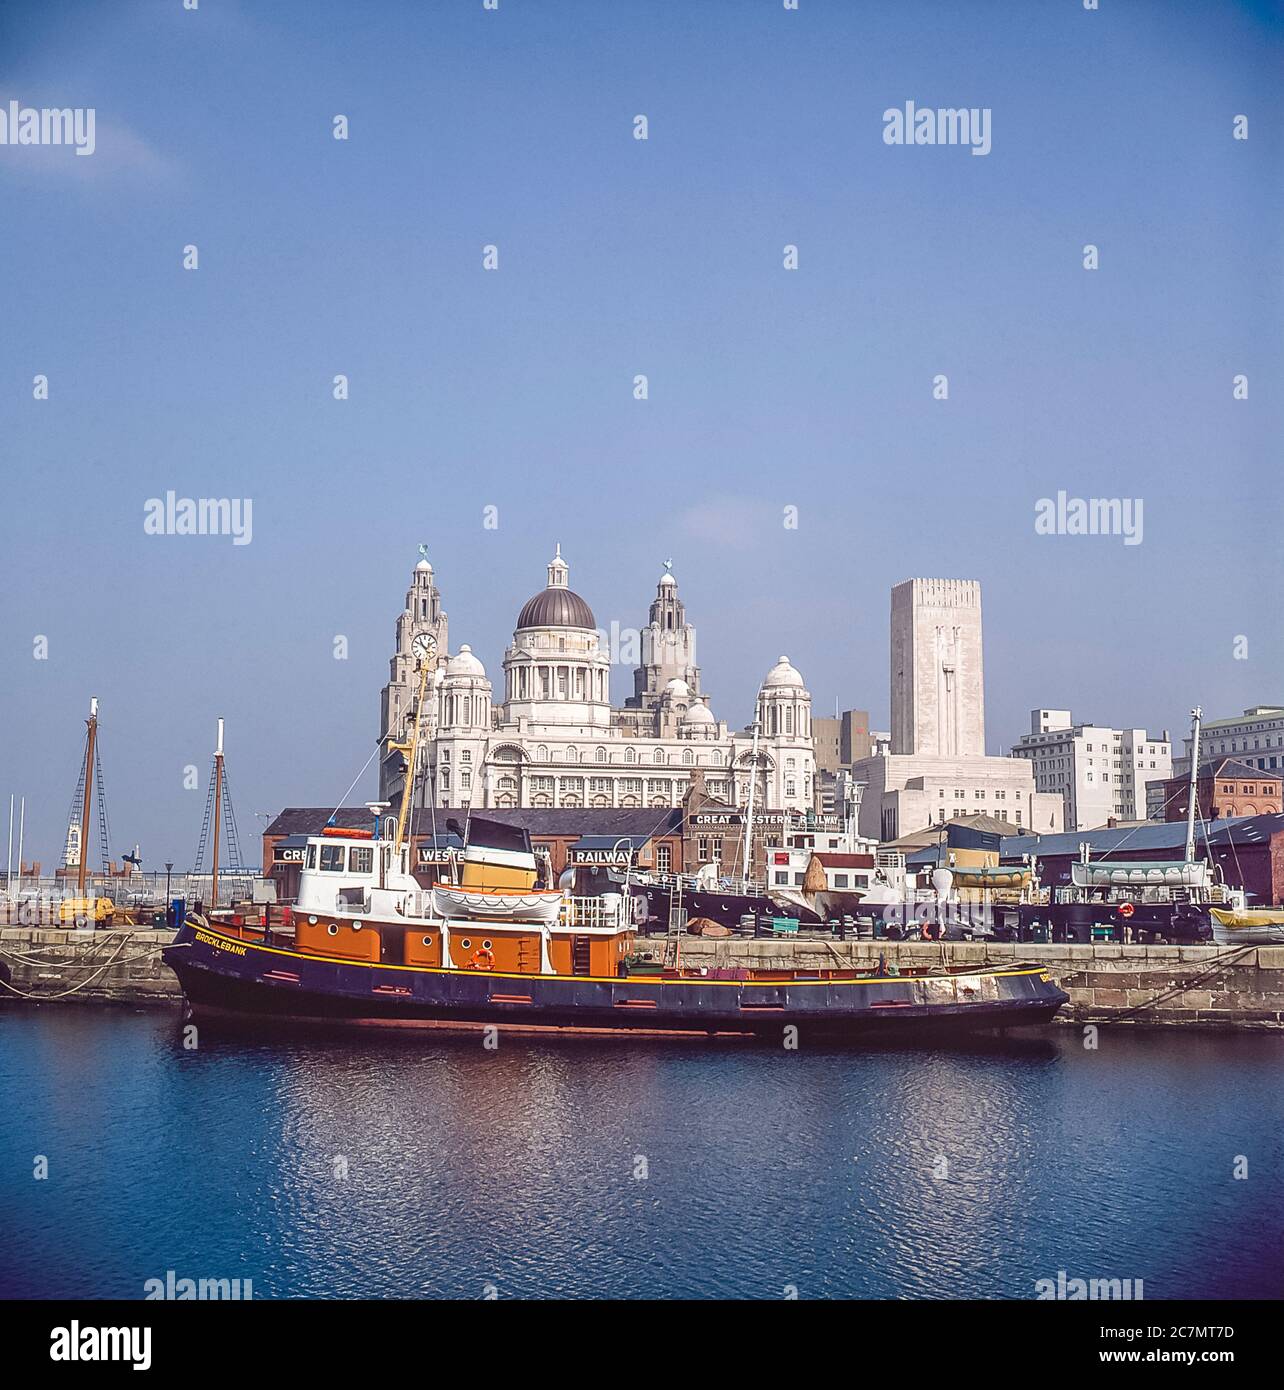 Liverpool. This is Liverpool docks looking across towards  the Royal Liver buildings with clock face and ventilation tower from the River Mersey tunnel Stock Photo